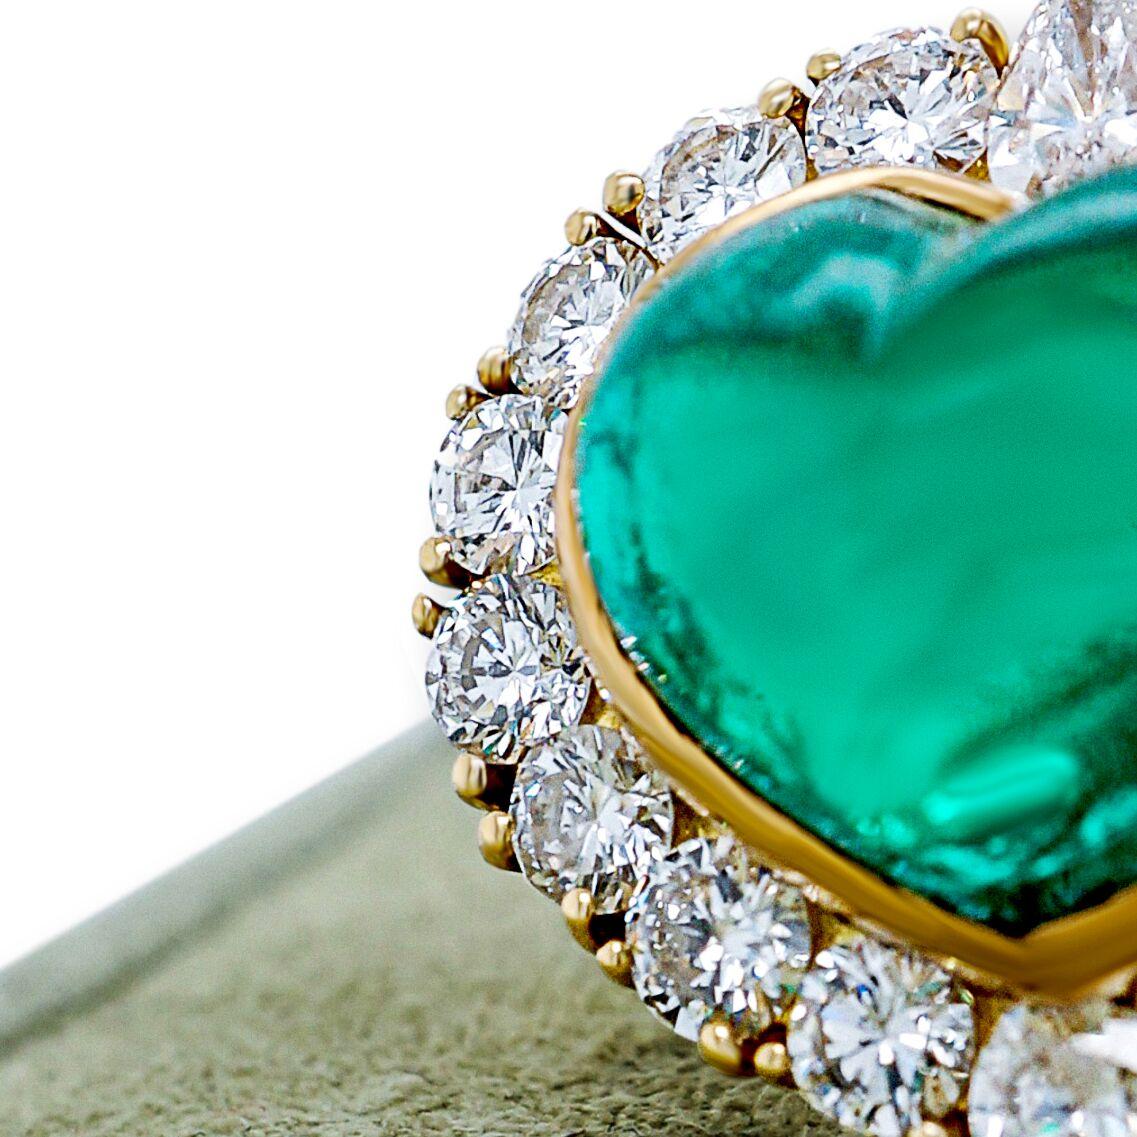 This Van Cleef & Arpels original piece boasts a very rare emerald, one with no signs or oil or heat enhancement. The surrounding diamonds weigh a total of 2.33kts making this piece an instant luxury statement.  